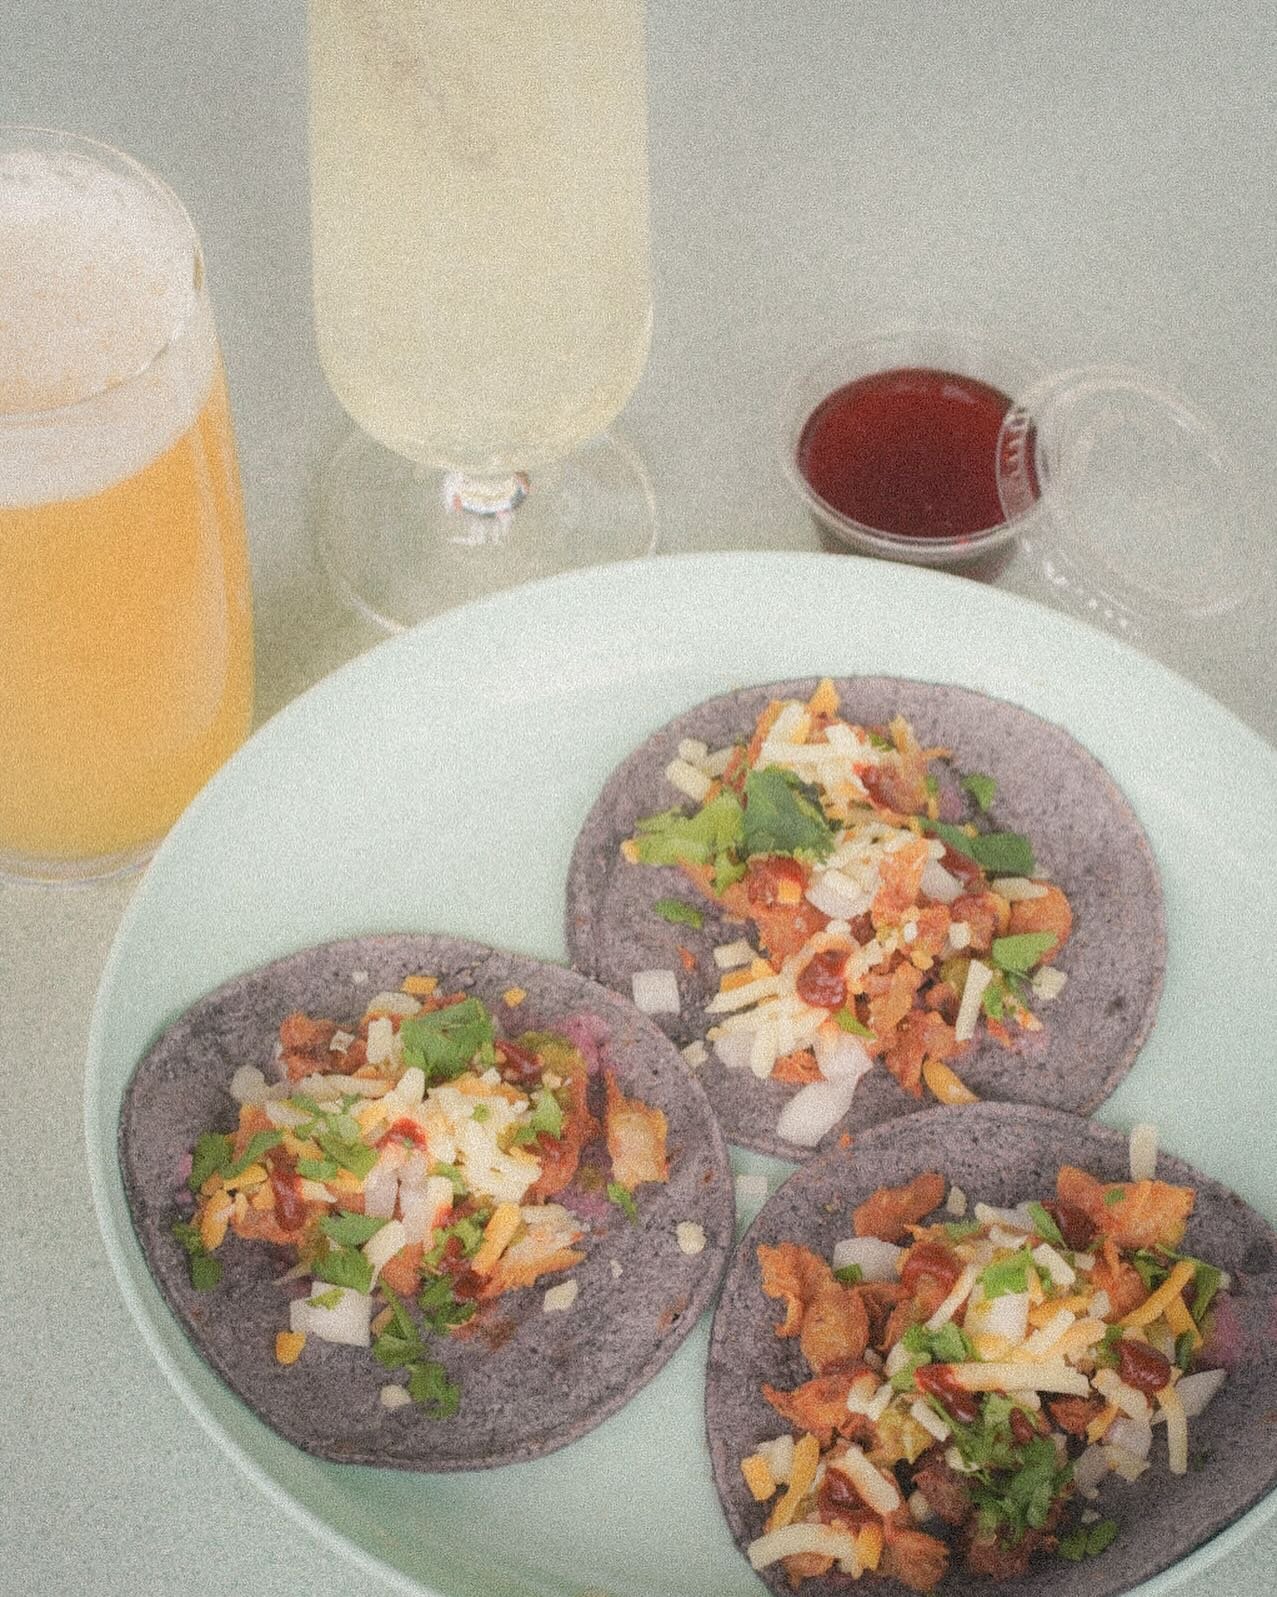 TACO SPECIAL TOMORROW!

Chicken Chicharr&oacute;n Taco - confit chicken fried crispy, shredded cheese, onion, cilantro, verde salsa, and guajillo hot sauce. Served in packs of 3 on delicious @milpamasa blue corn tortillas.

Supplies extremely limited